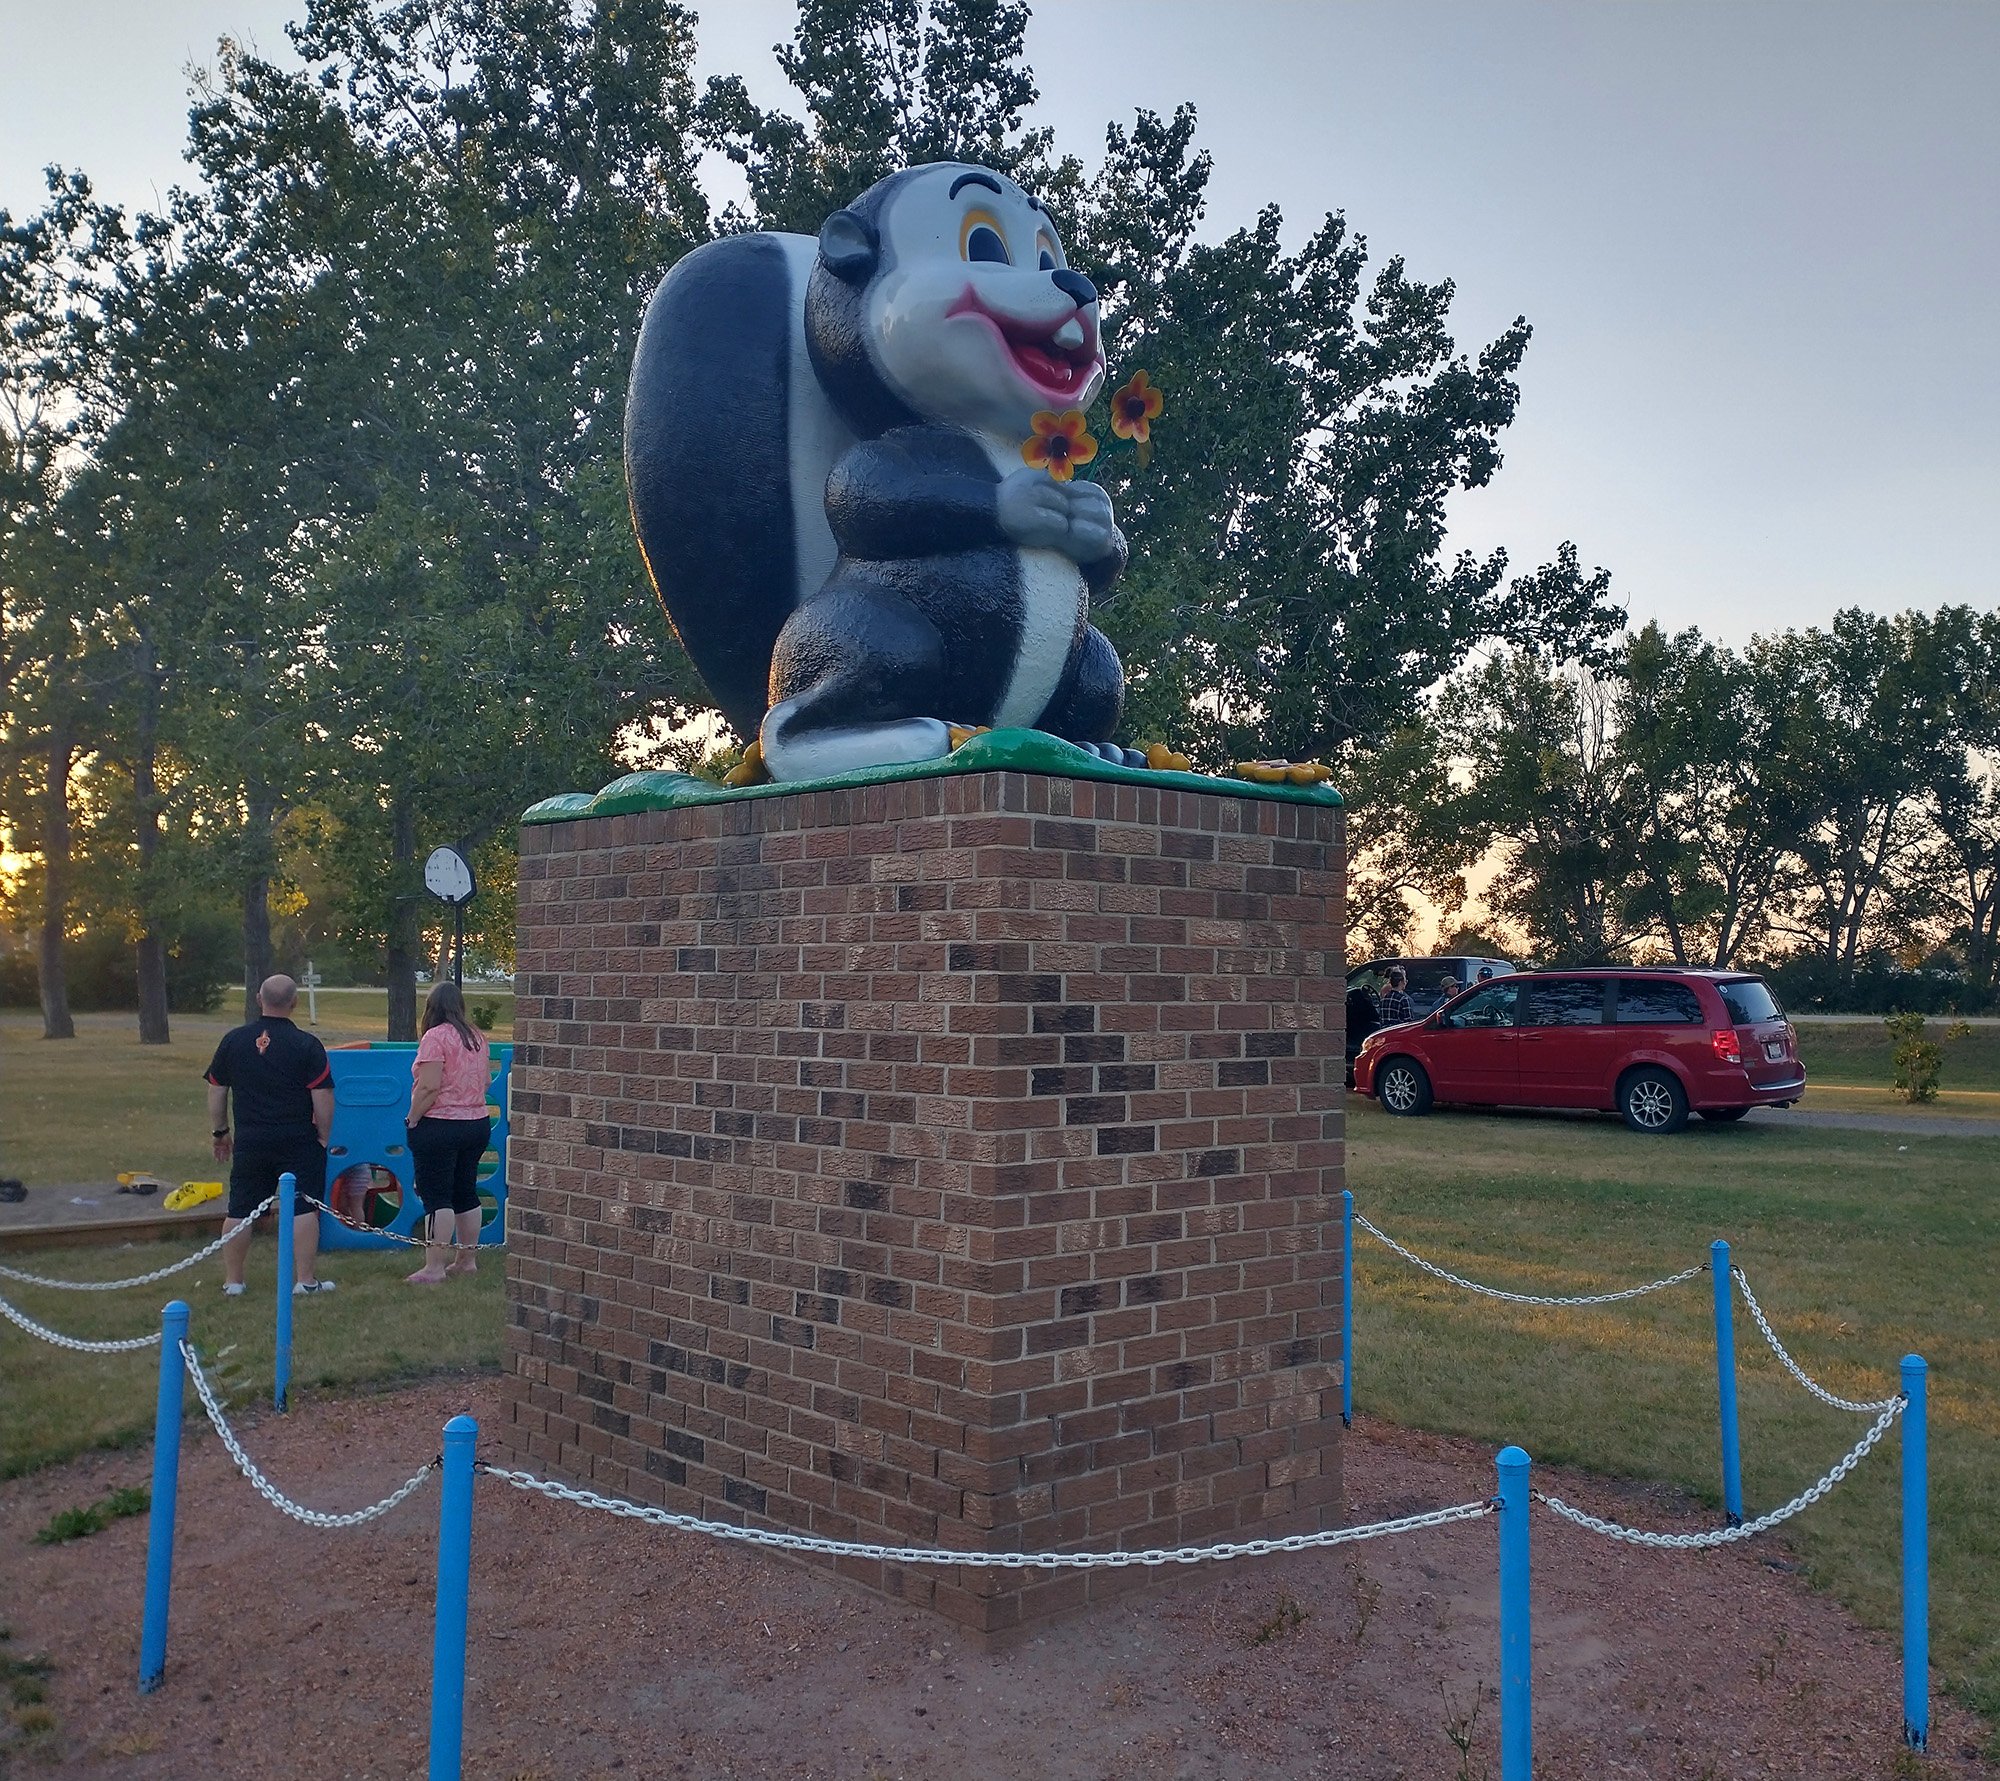 Last stop, almost at sunset: Squirt The Skunk, at the Beiseker AB campground.